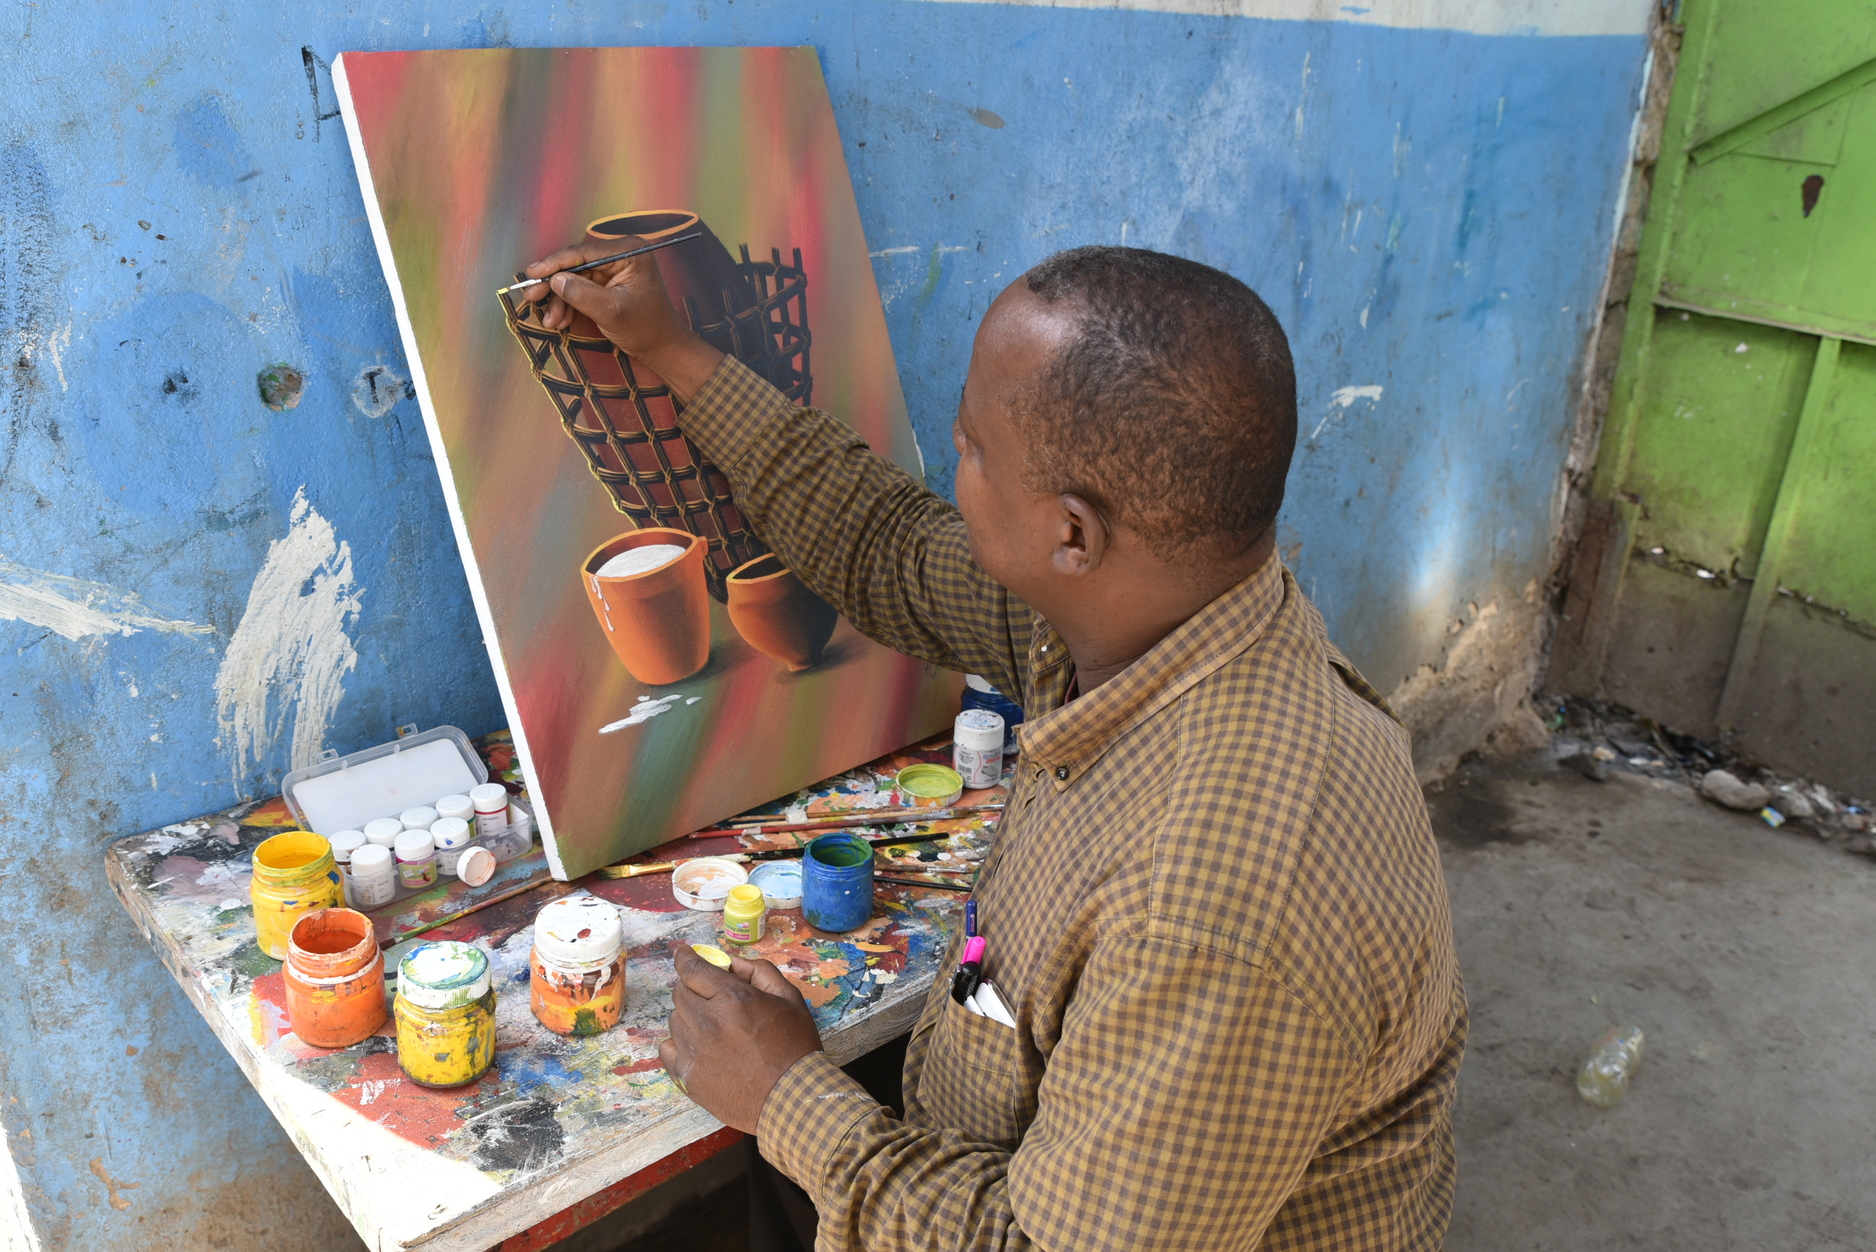 Somali refugee uses his artistic skills to earn a living